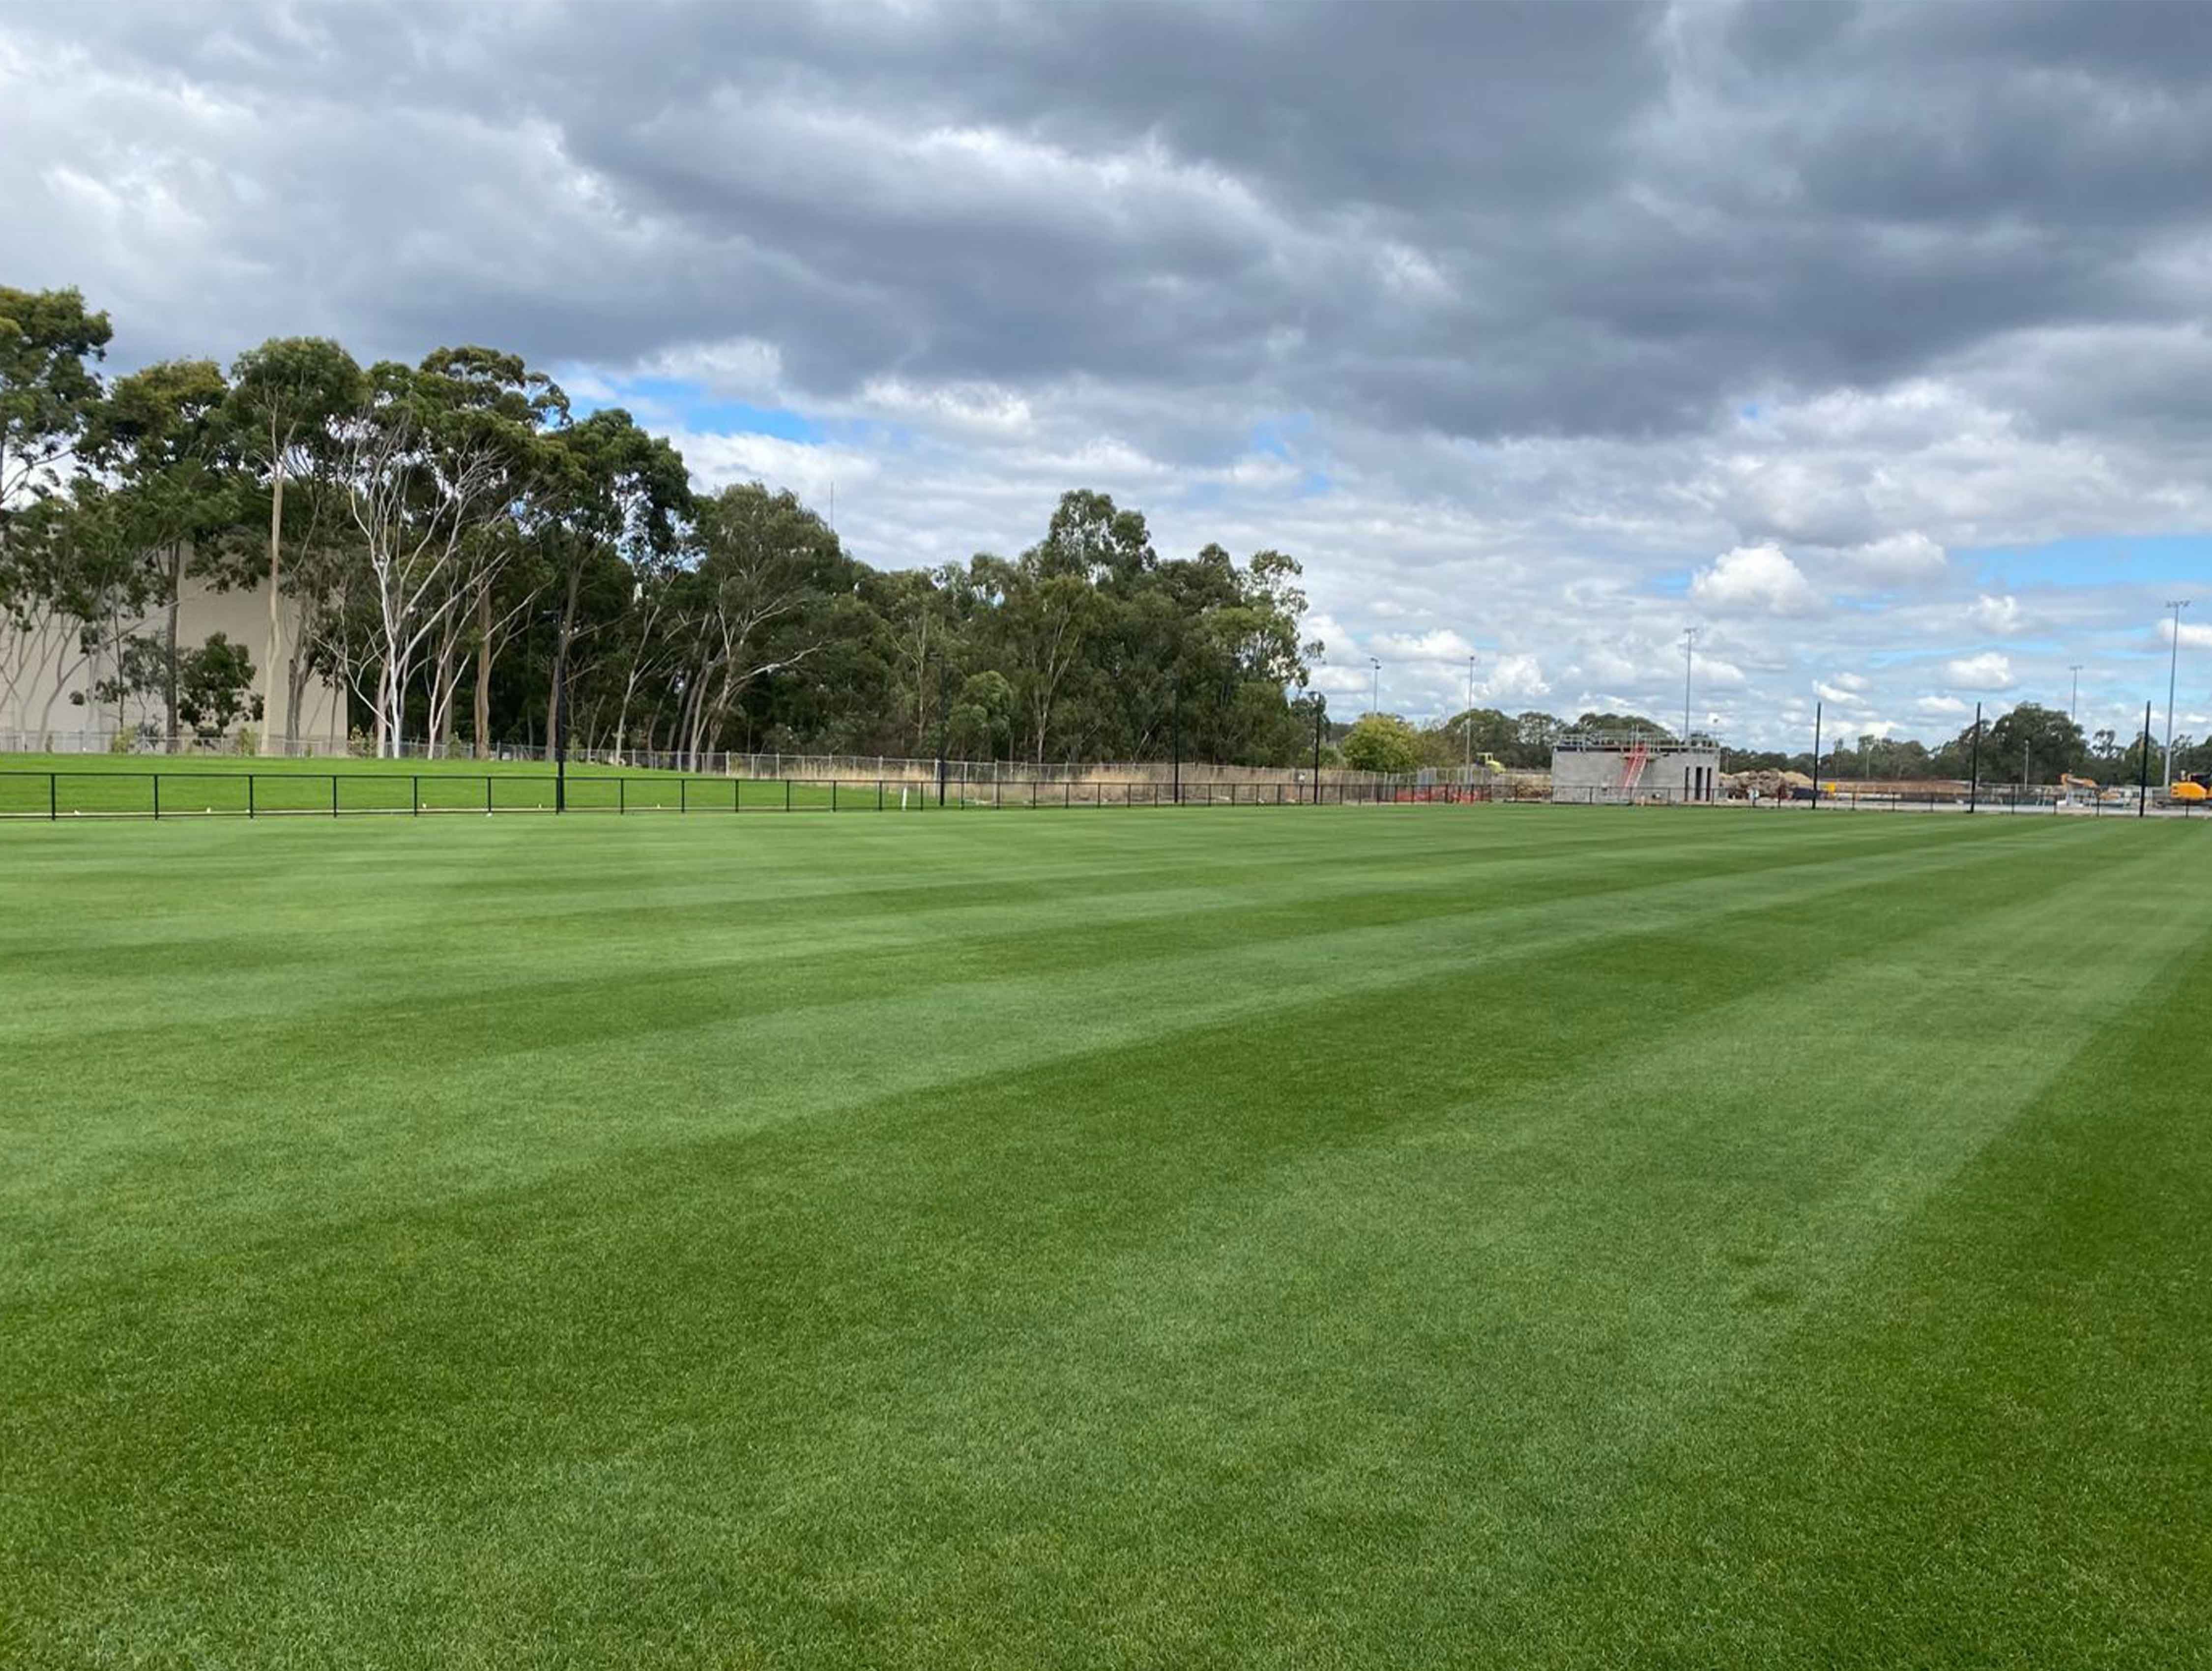 Panoramice view of an AFL sports field using a hybrid turf surface